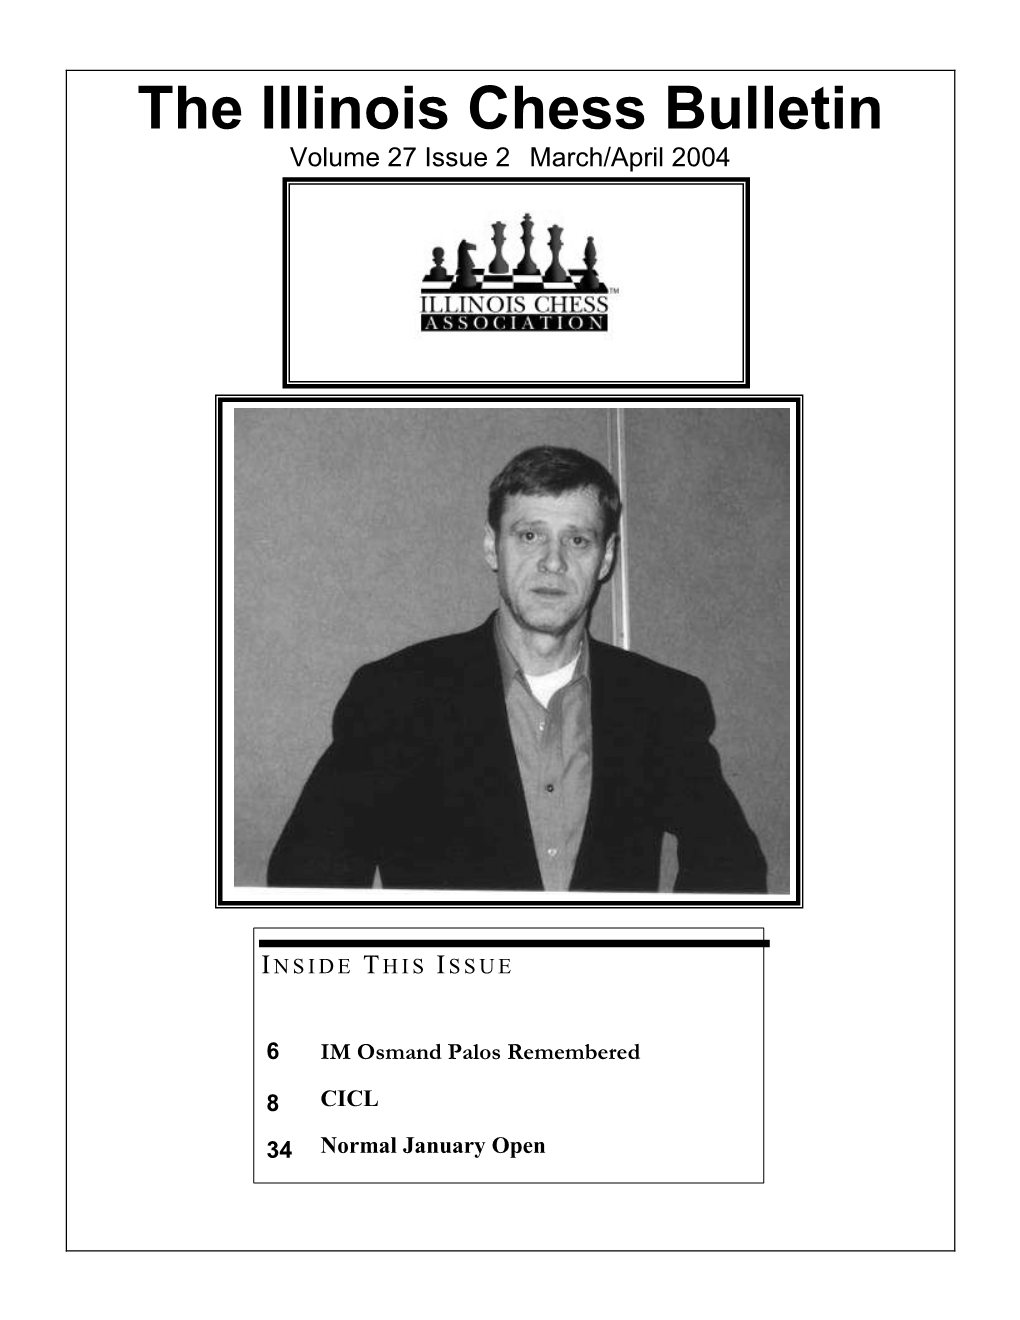 The Illinois Chess Bulletin Volume 27 Issue 2 March/April 2004